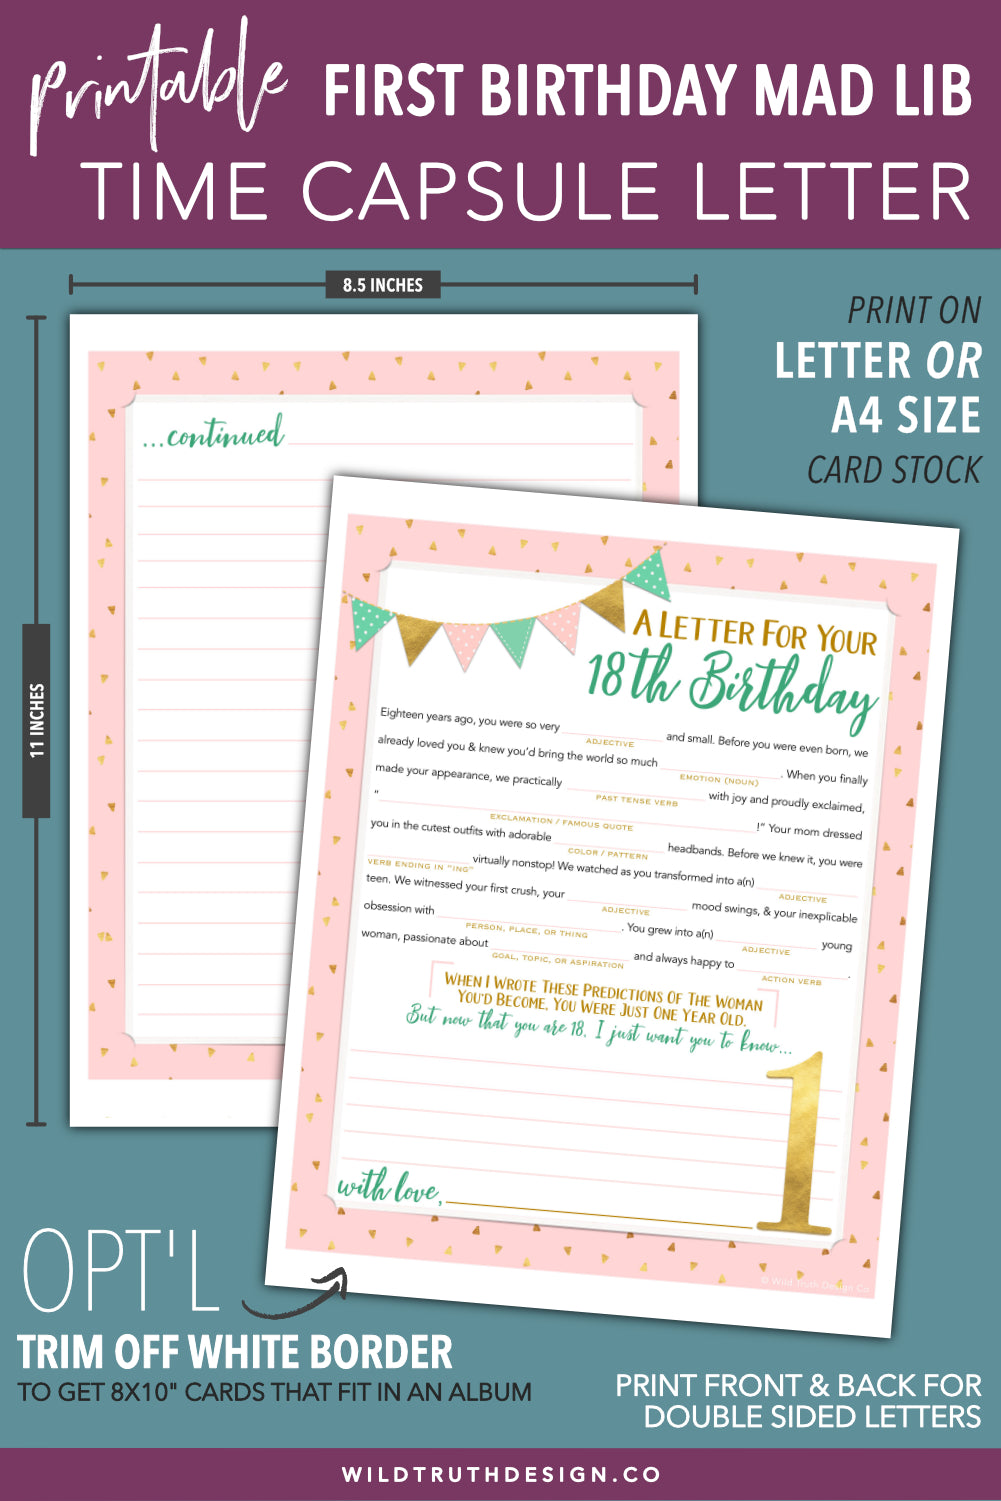 time-capsule-letter-madlib-girl-s-first-birthday-wild-truth-design-co